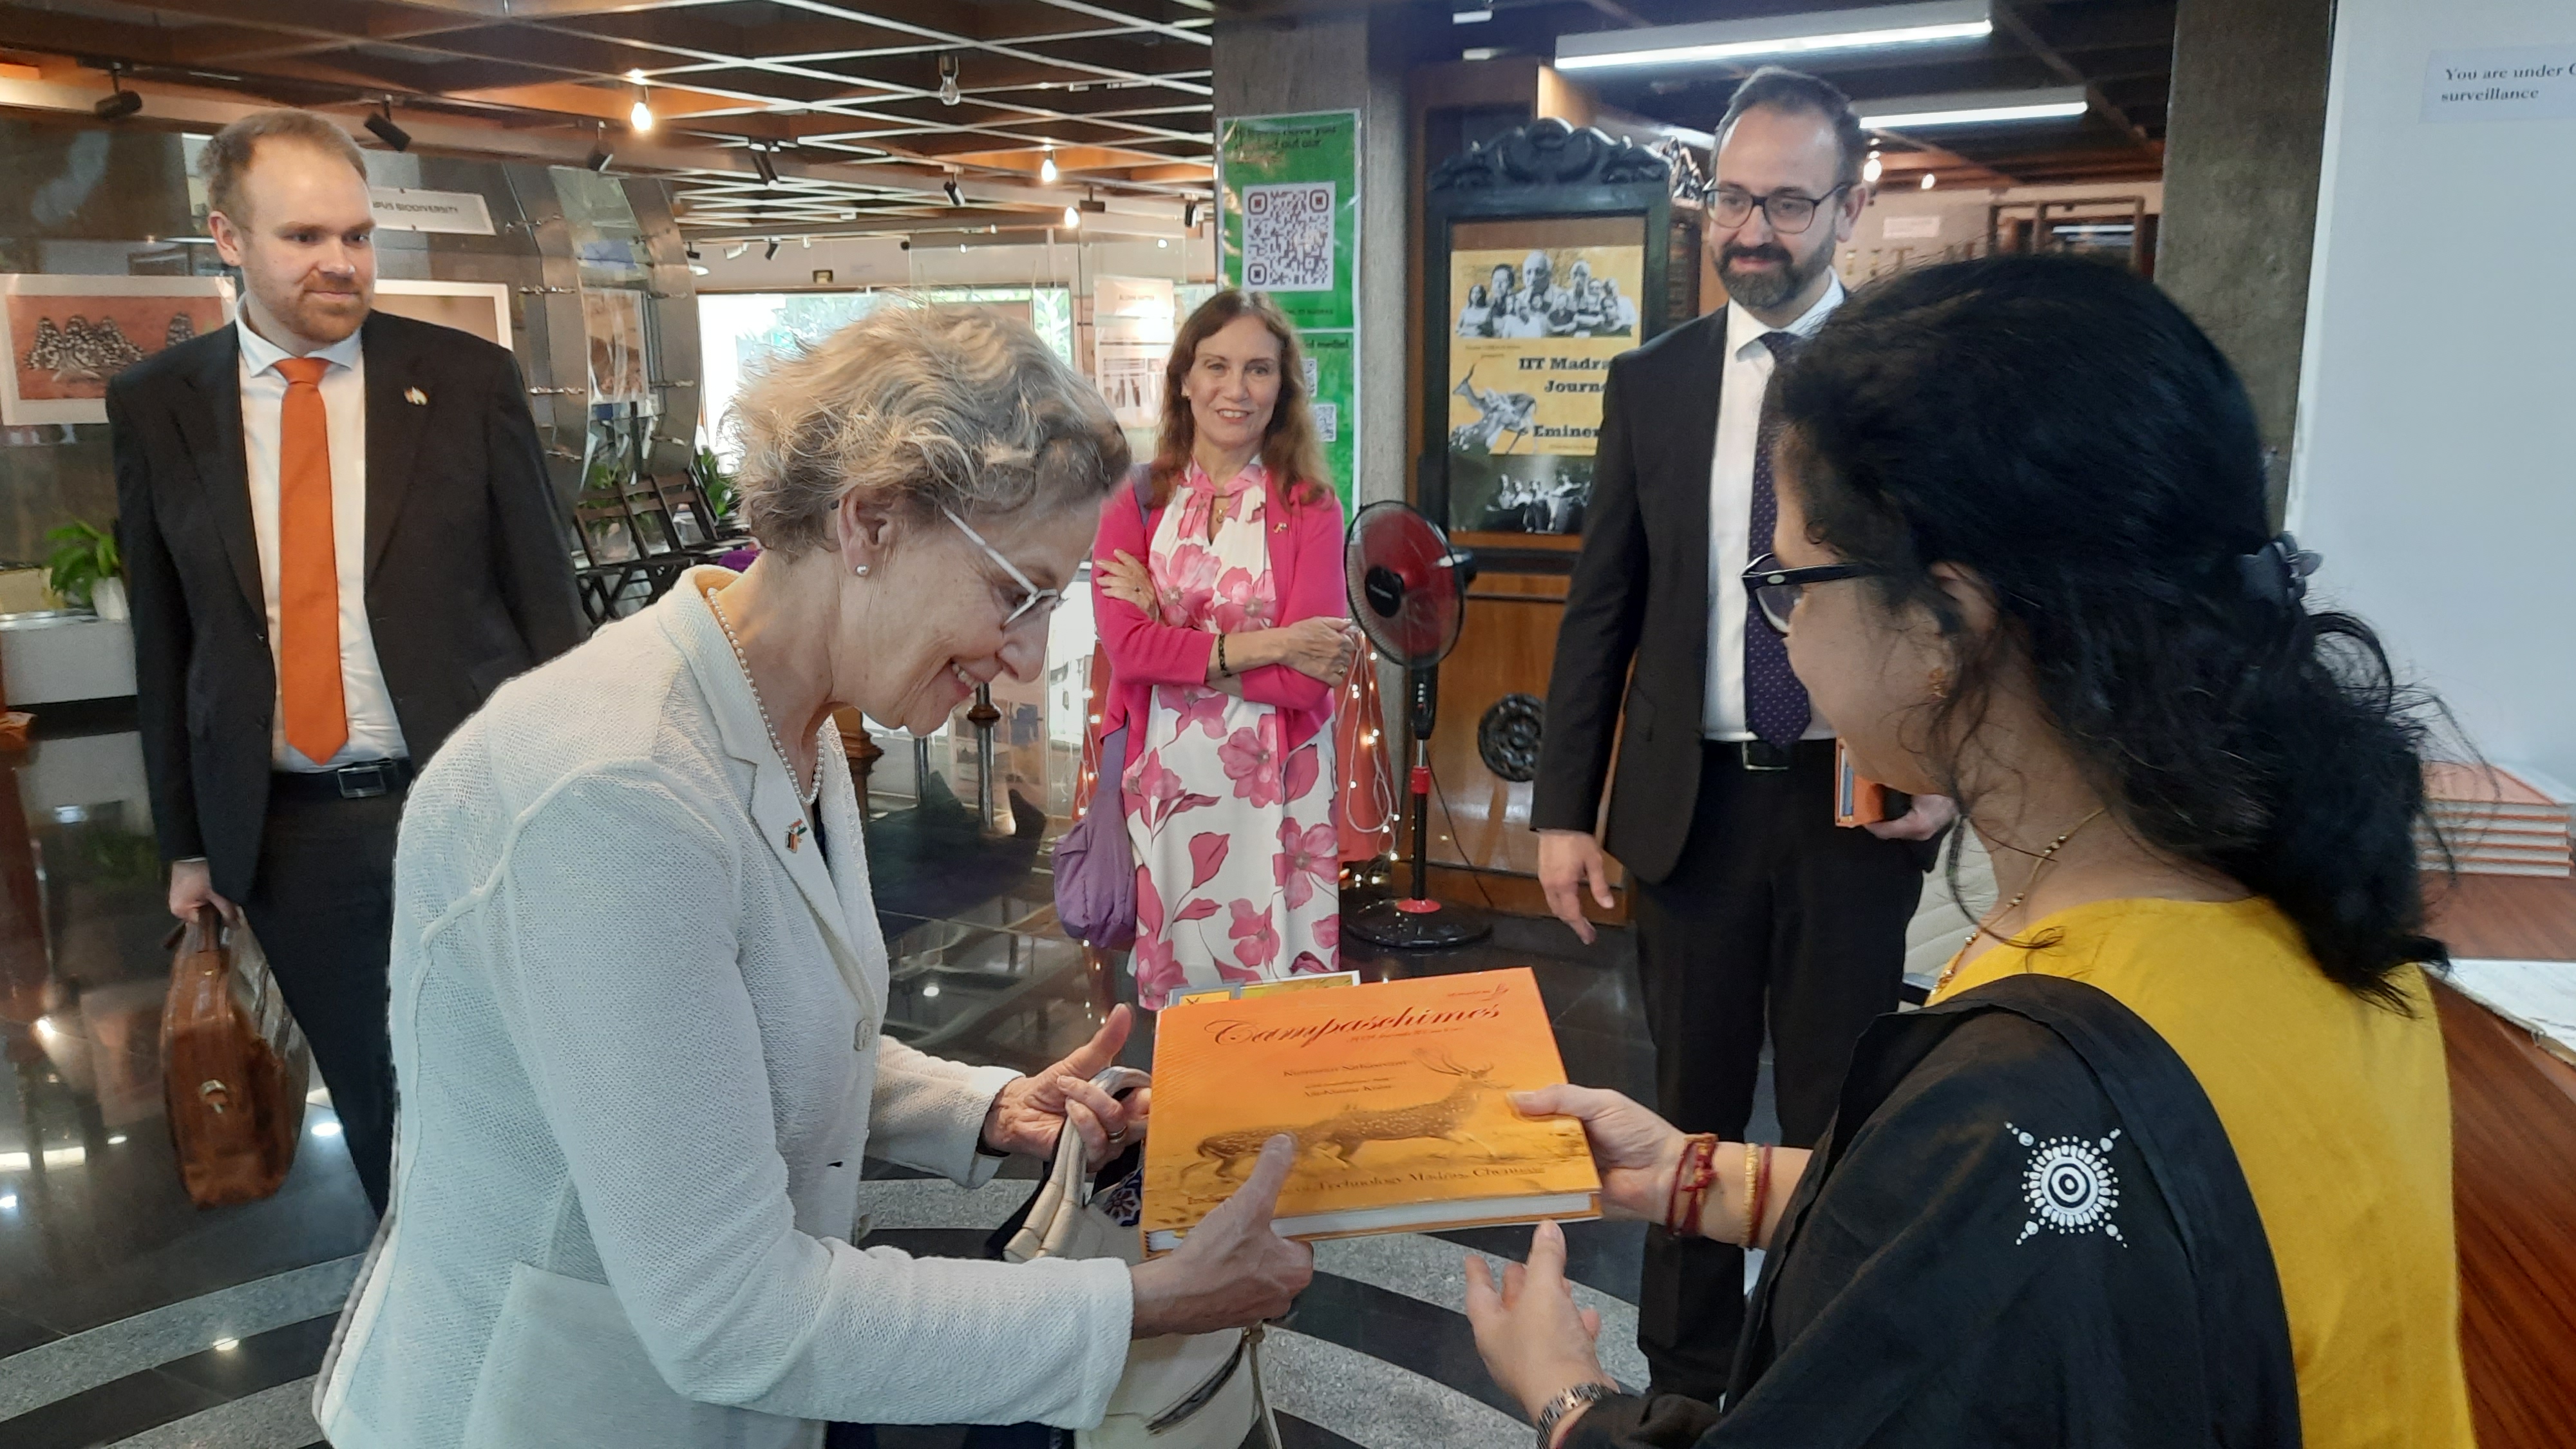 Prof. Ursula Staudinger (President of the Dresden University of Technology) receives a copy of Campaschimes